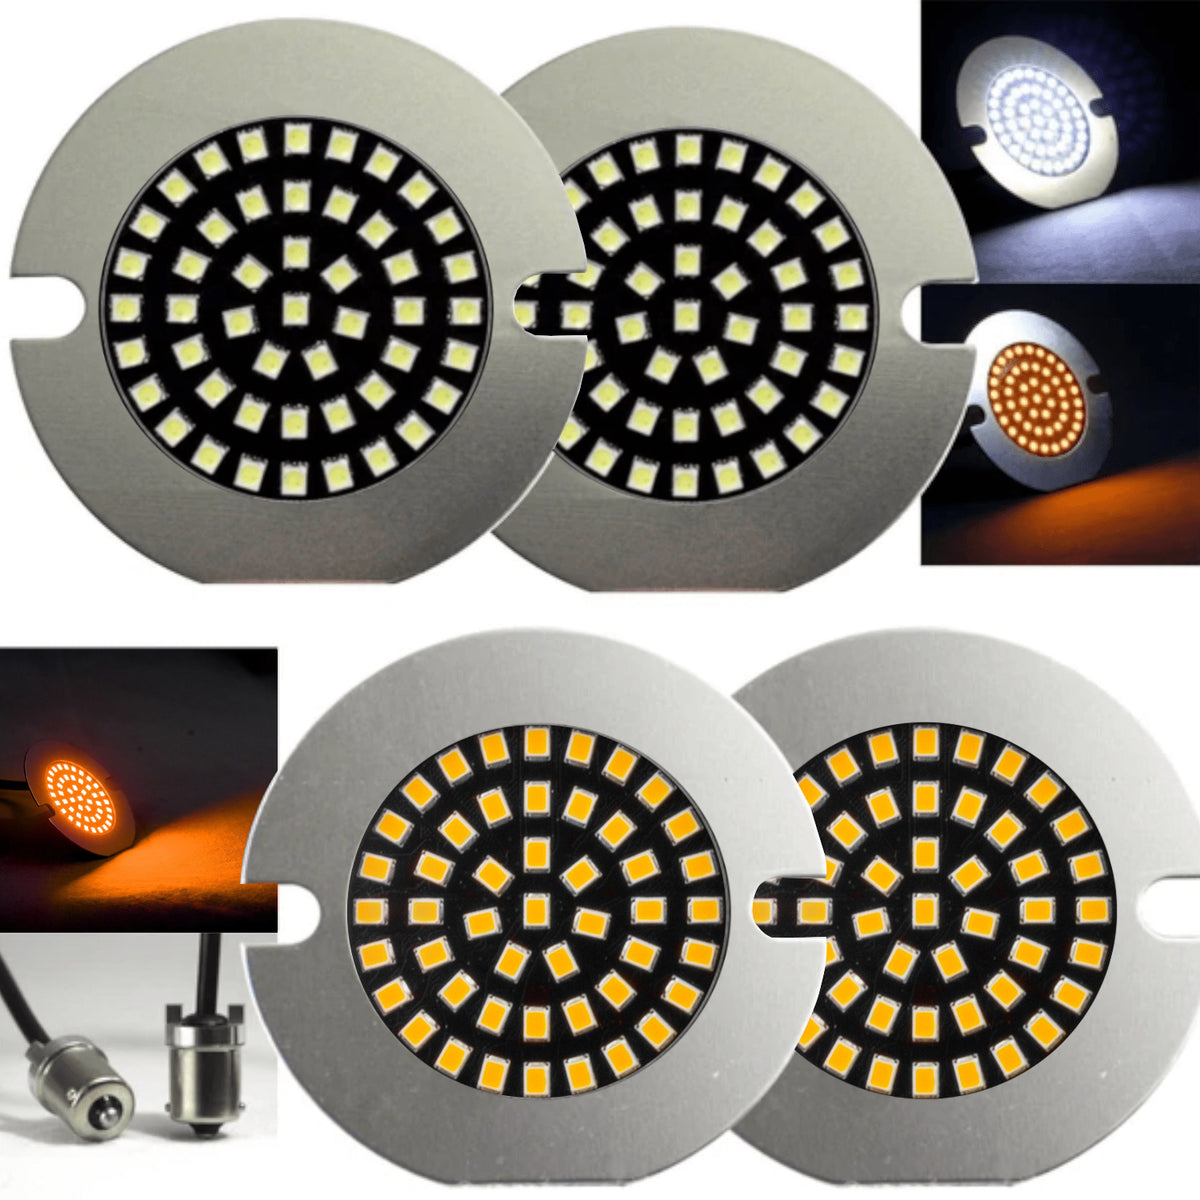 Eagle Lights Midnight Edition 3 1/4" Front and Rear LED Turn Signals For Harley Davidson Motorcycles - 1157 Base Front / 1156 Base Amber Rear